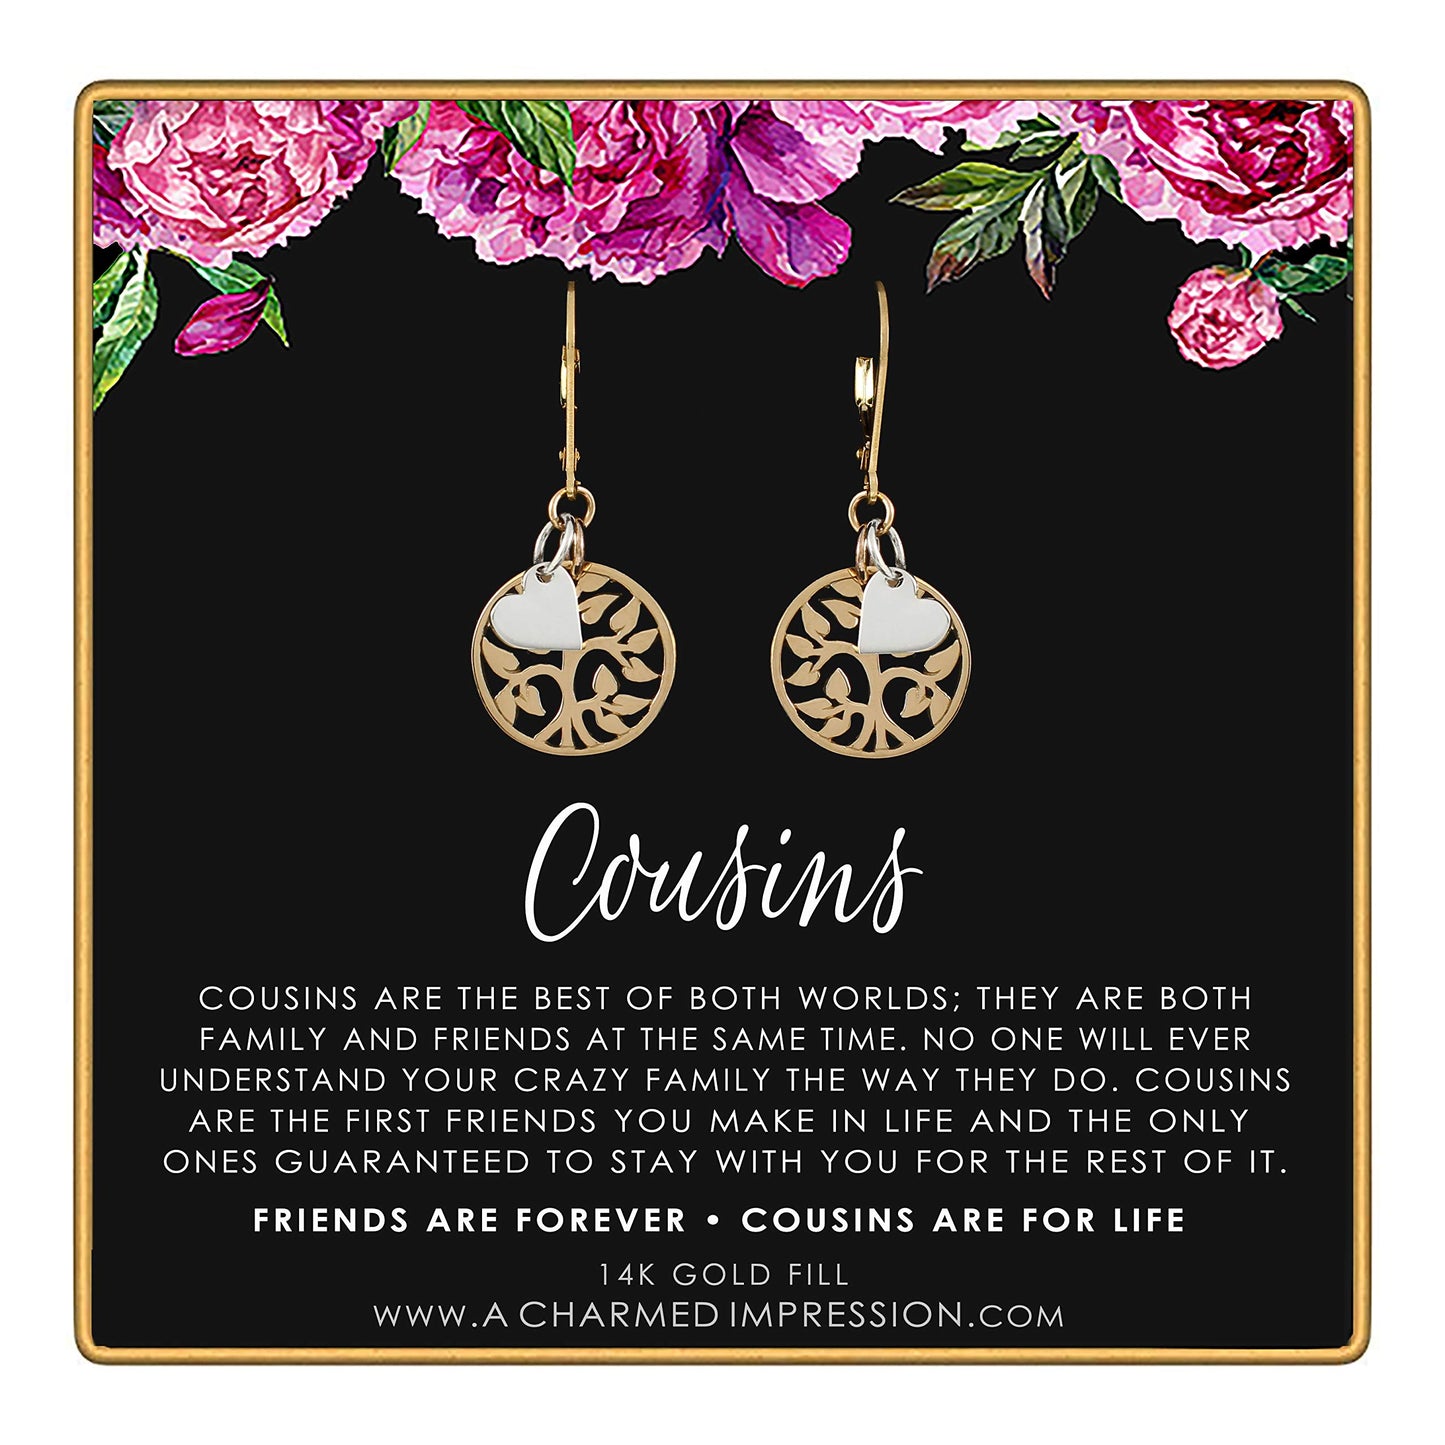 Cousin Gifts for Women • Gift for Cousin Woman • 14k Gold Filled Leverback Earrings • Gold Tree with Sterling Silver Heart • Family Tree • Loving Cousin Jewelry • Meaningful Jewelry for Women